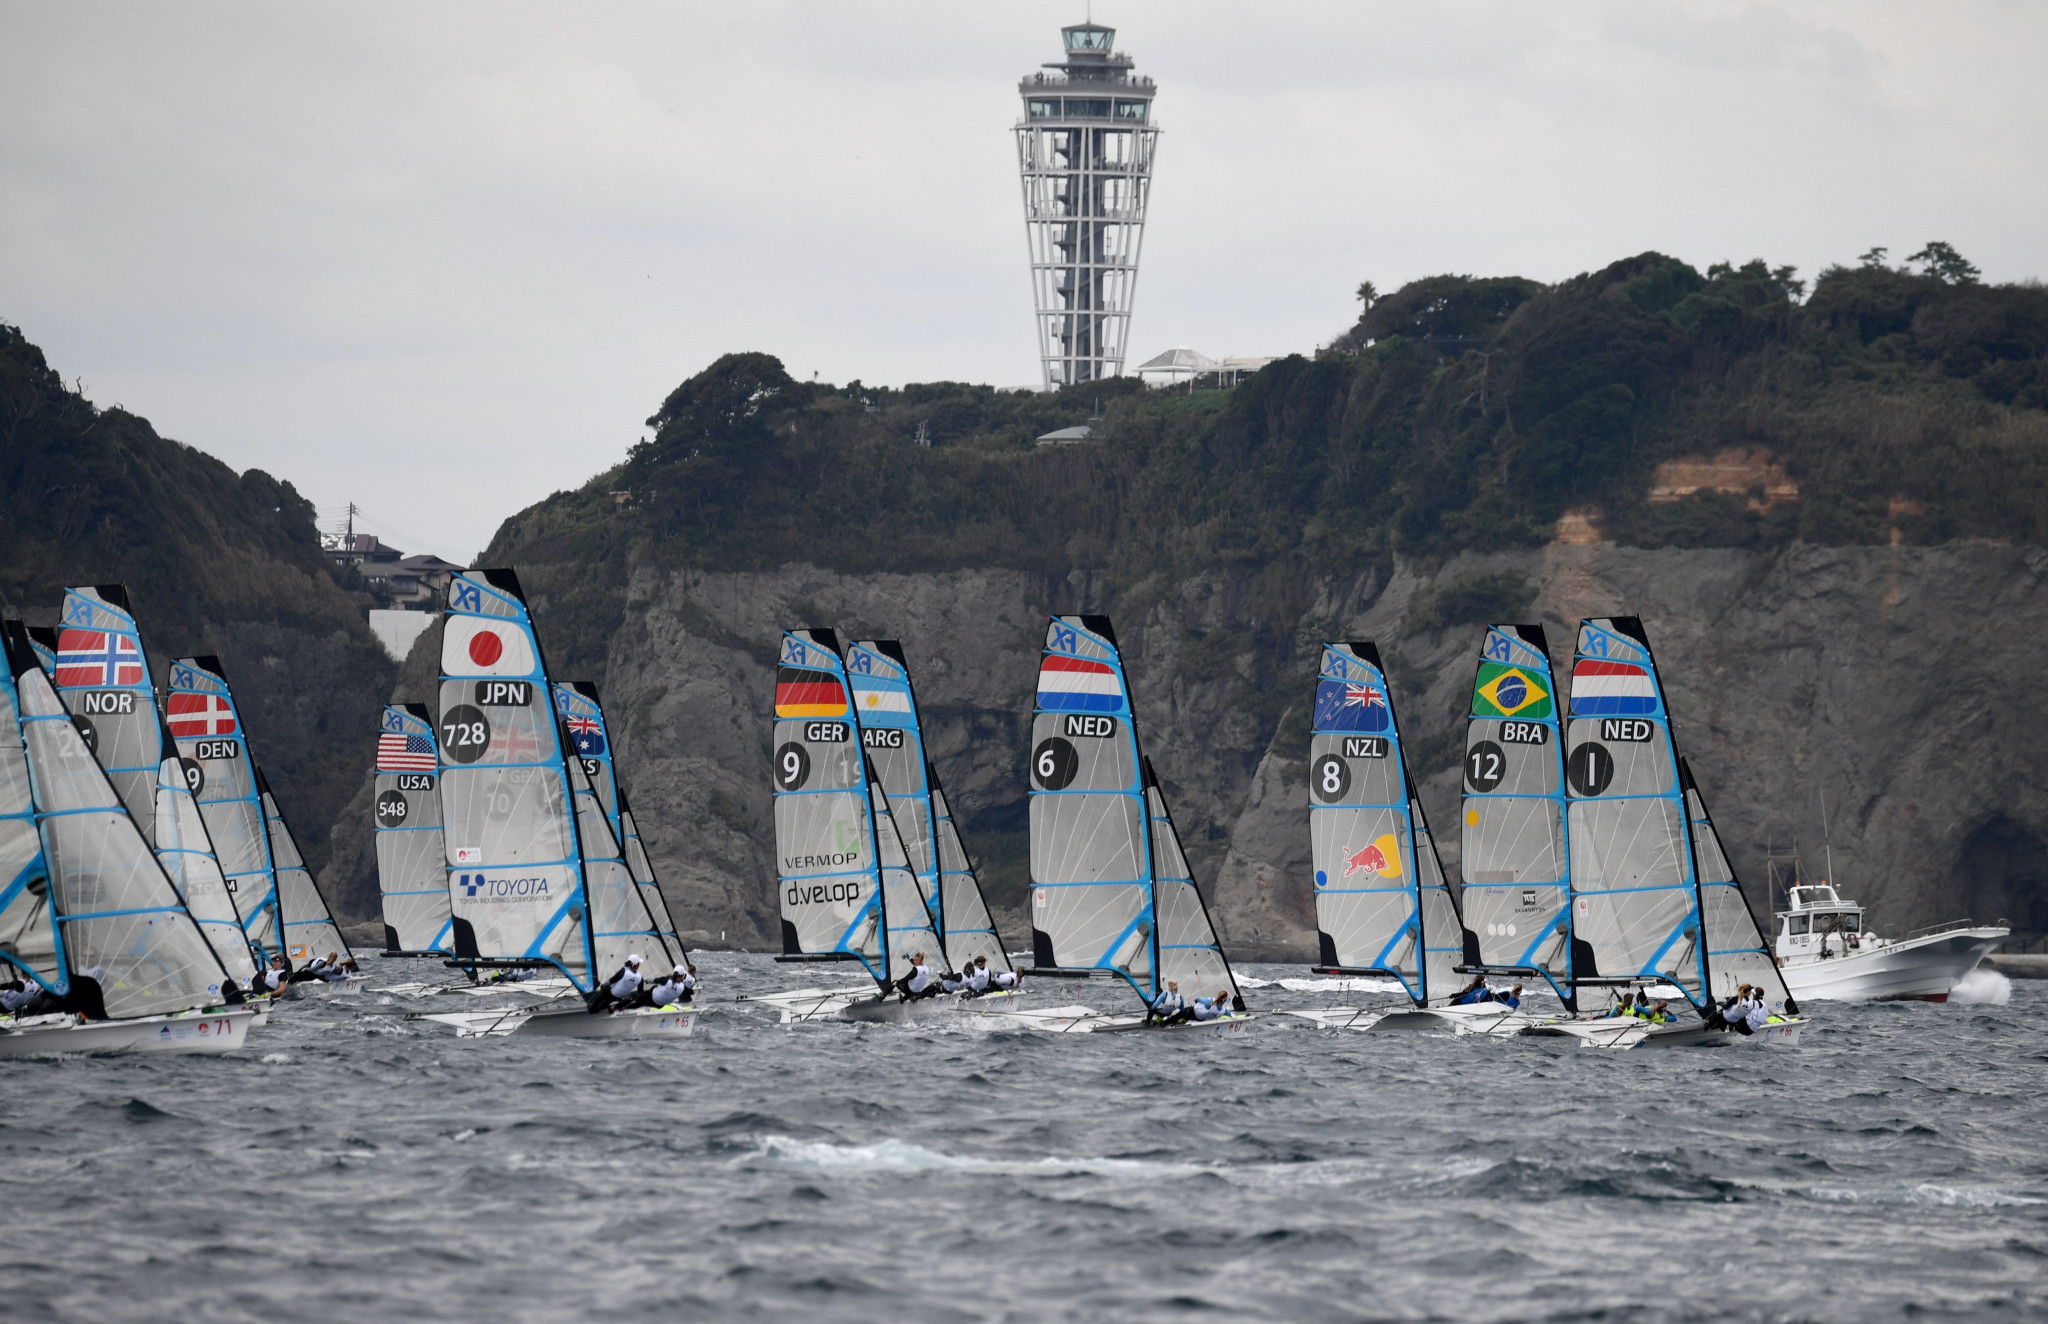 World Sailing chief executive Andy Hunt expressed concerns over provisions for athletes ©Getty Images